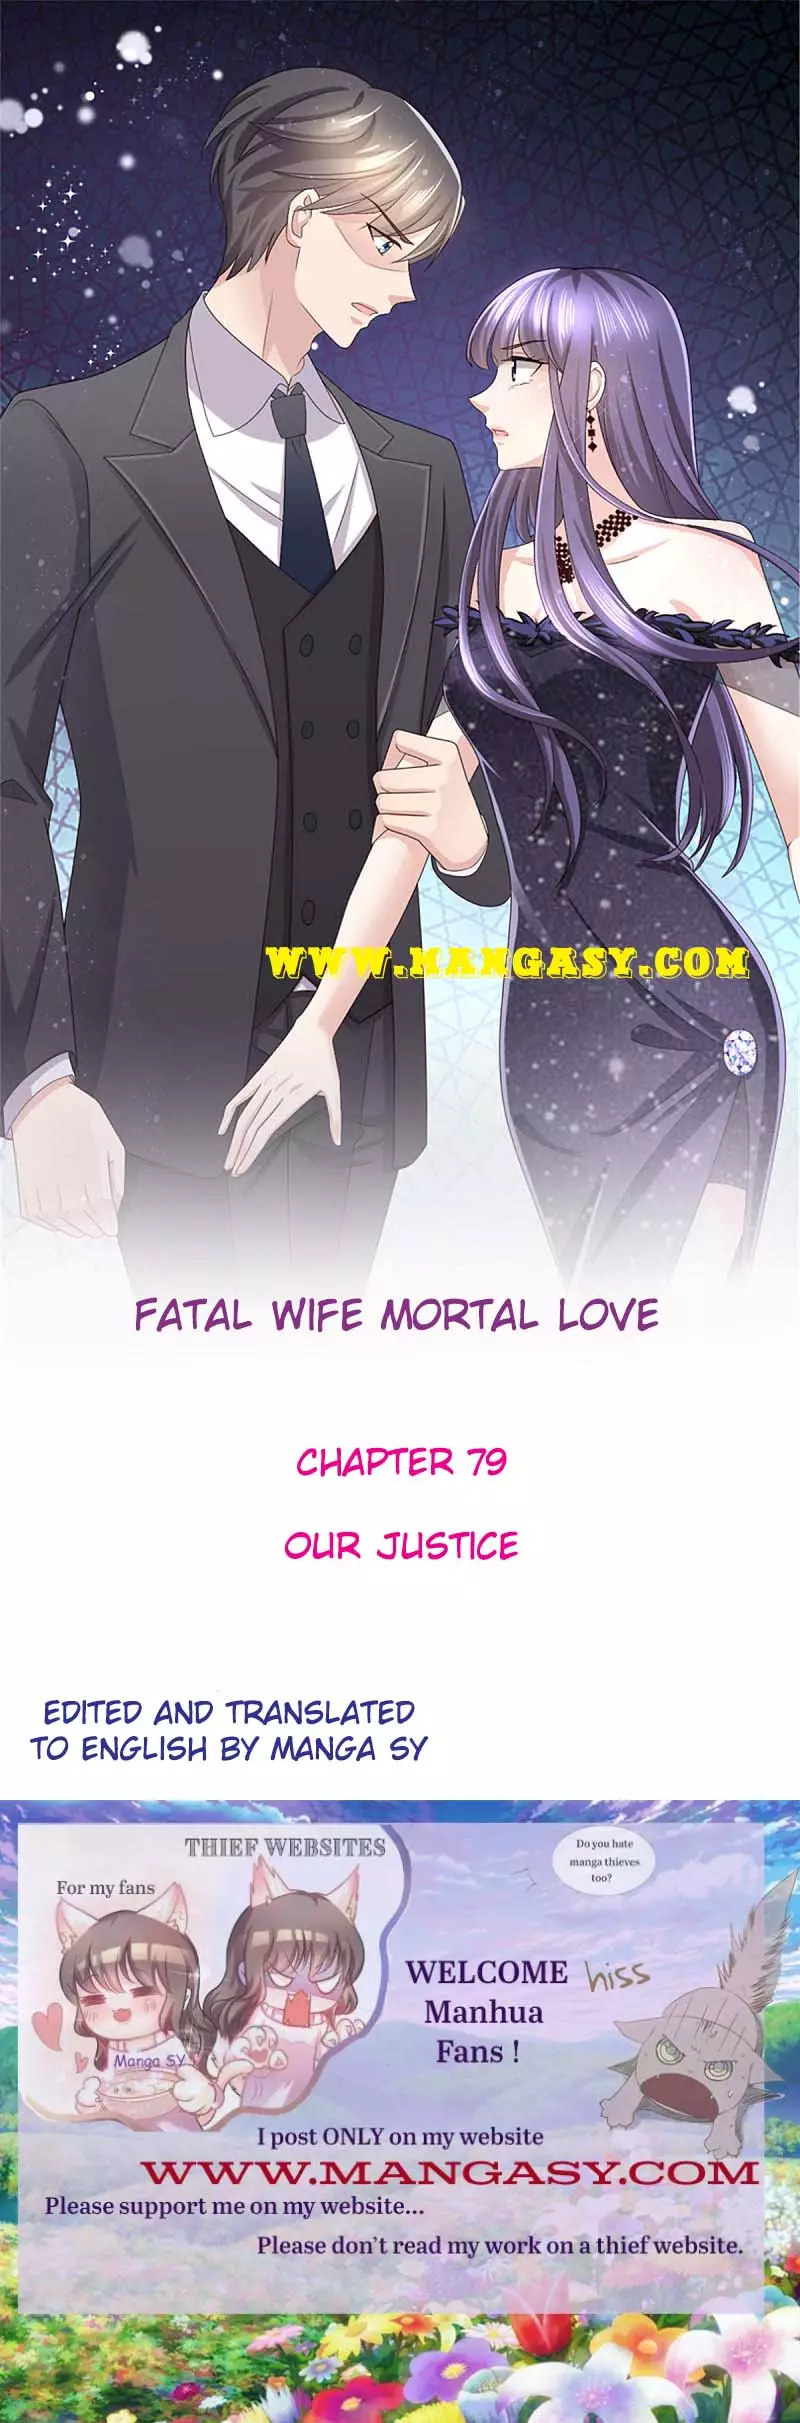 A Deadly Sexy Wife: The Ceo Wants To Remarry - 79 page 1-58b374af